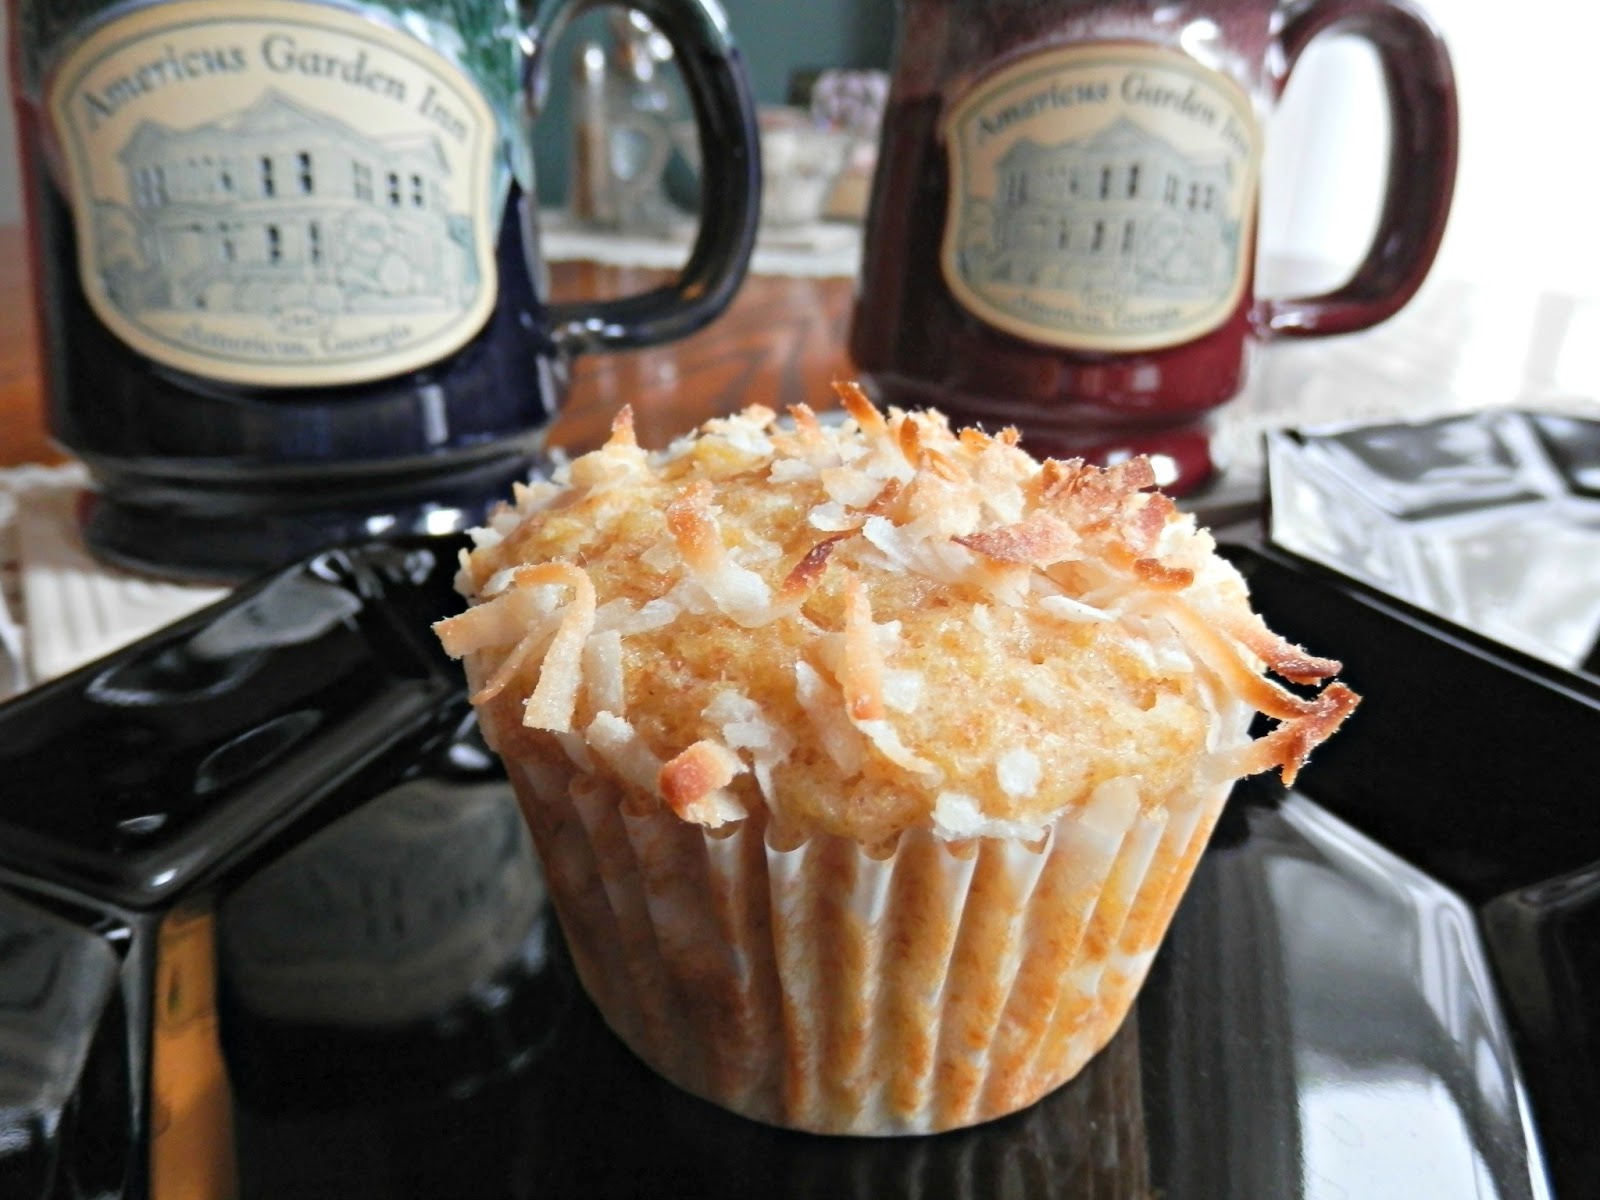 Americus Garden Inn Bed and Breakfast: Pina Colada Muffins